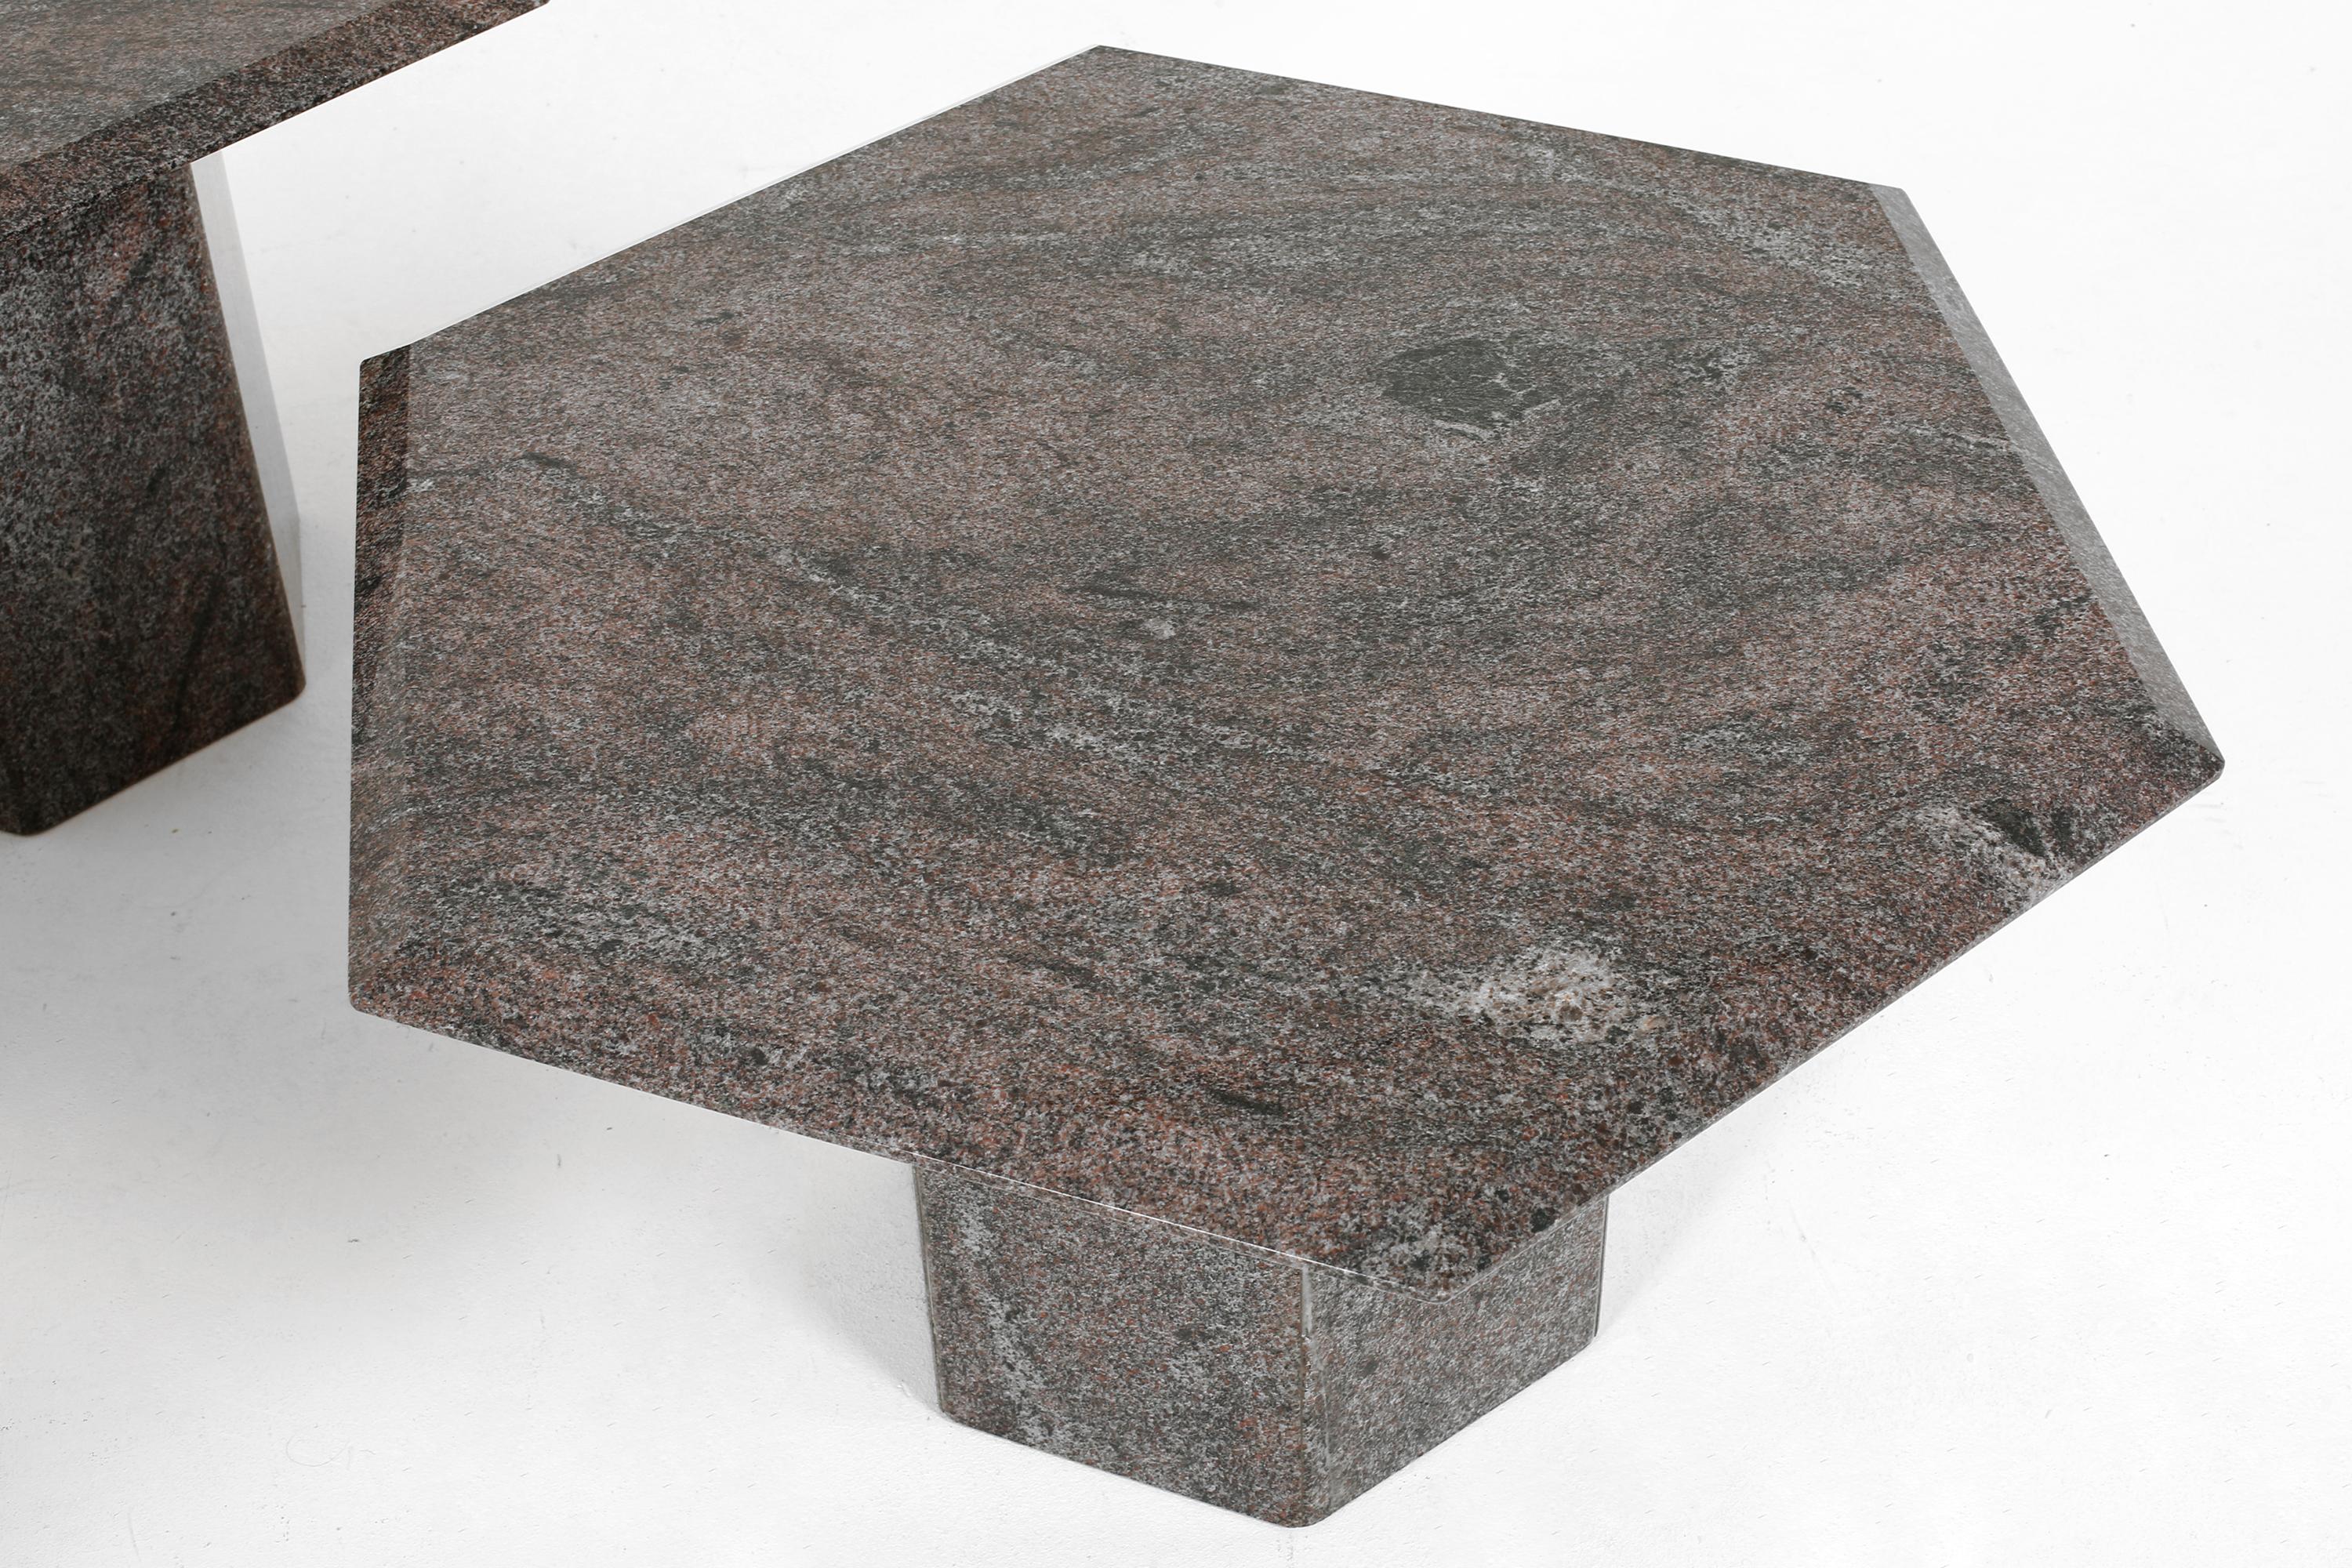 Late 20th Century French Hexagonal Stone Side Tables c. 1970s Marble Granite For Sale